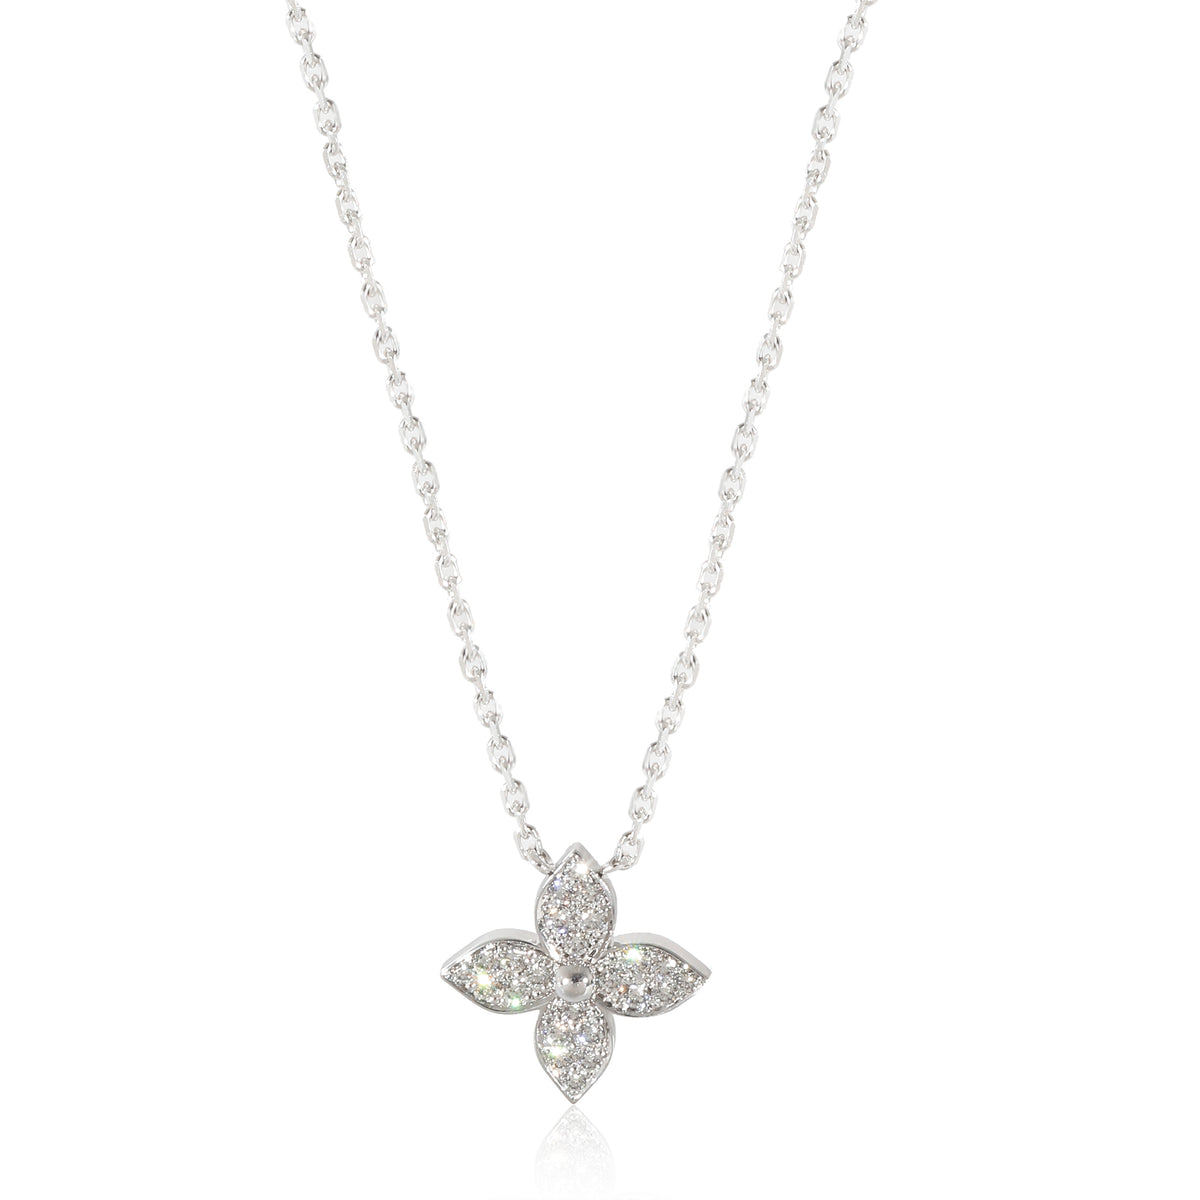 Louis Vuitton White Gold and Diamond Idylle Blossom Medallion Necklace